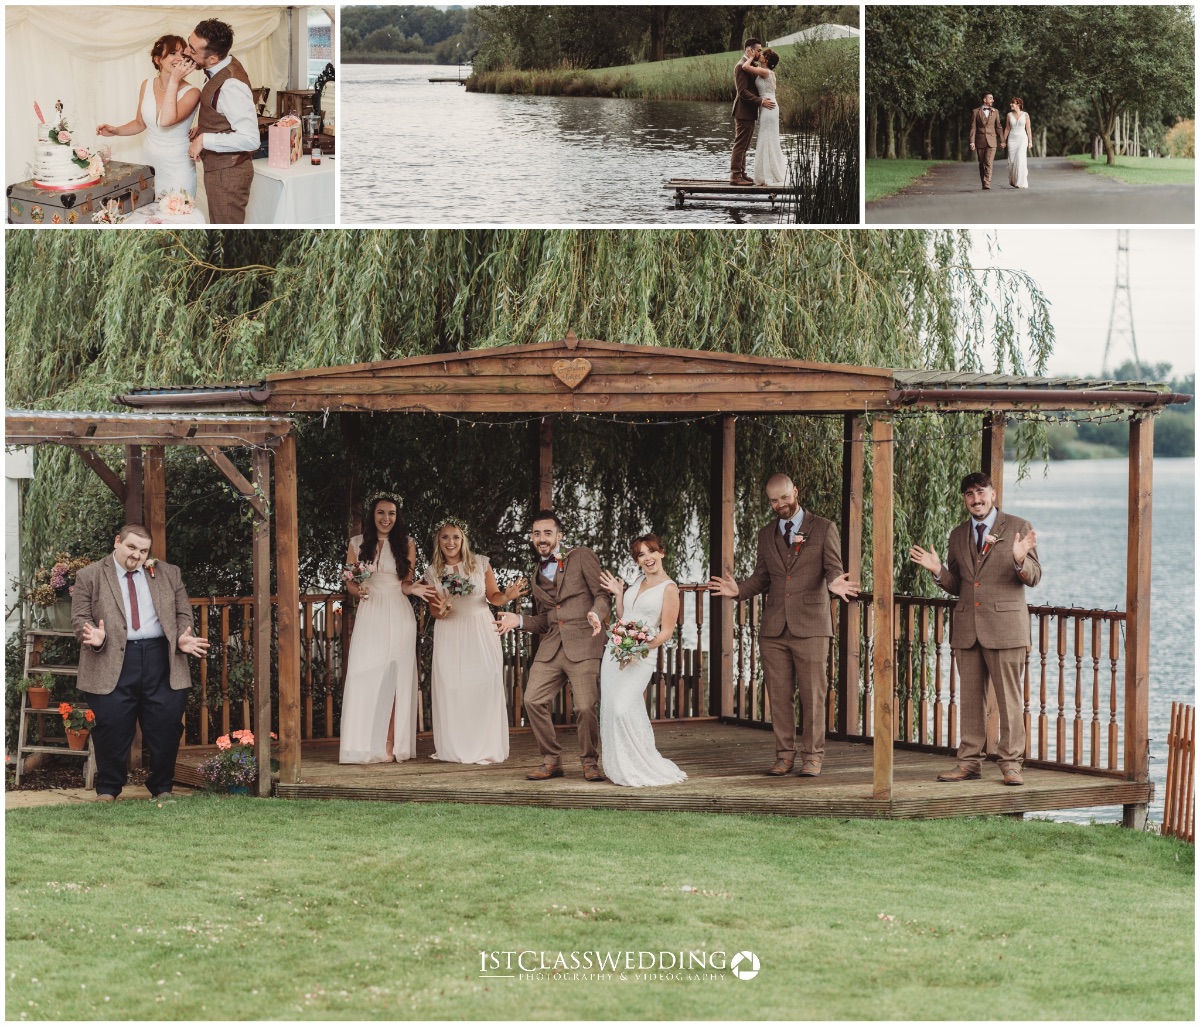 1st Class Wedding Photography & Videography-Image-372